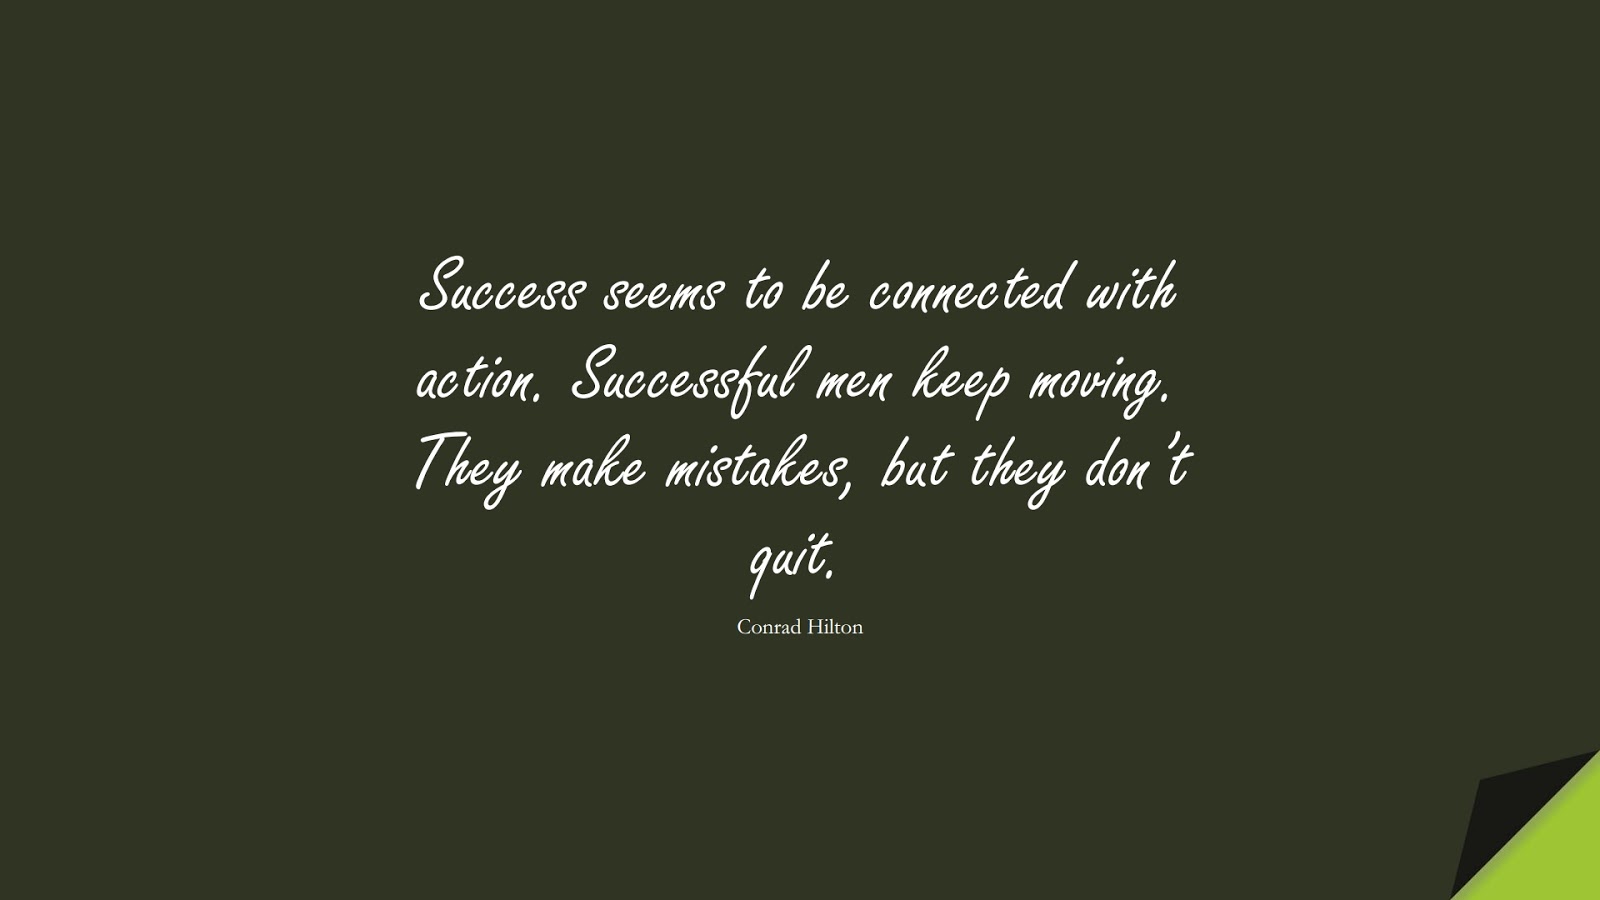 Success seems to be connected with action. Successful men keep moving. They make mistakes, but they don’t quit. (Conrad Hilton);  #PerseveranceQuotes